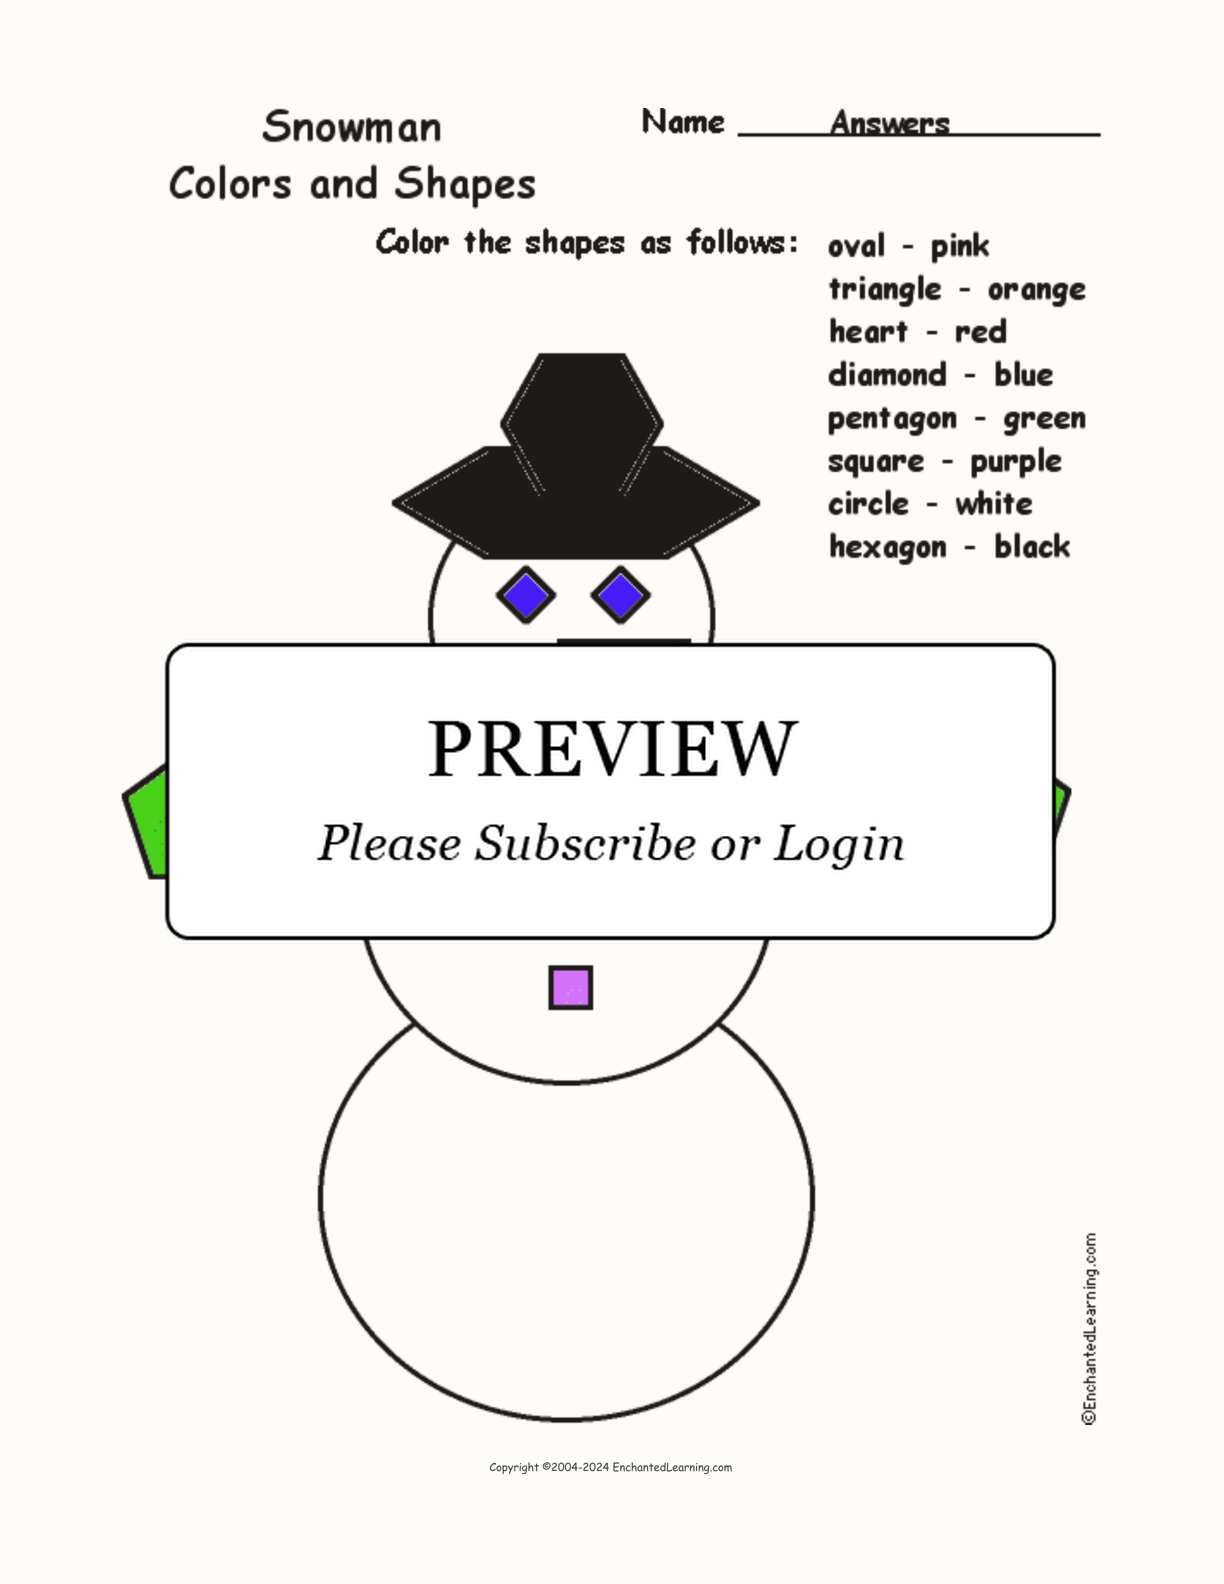 Snowman: Colors and Shapes interactive worksheet page 2